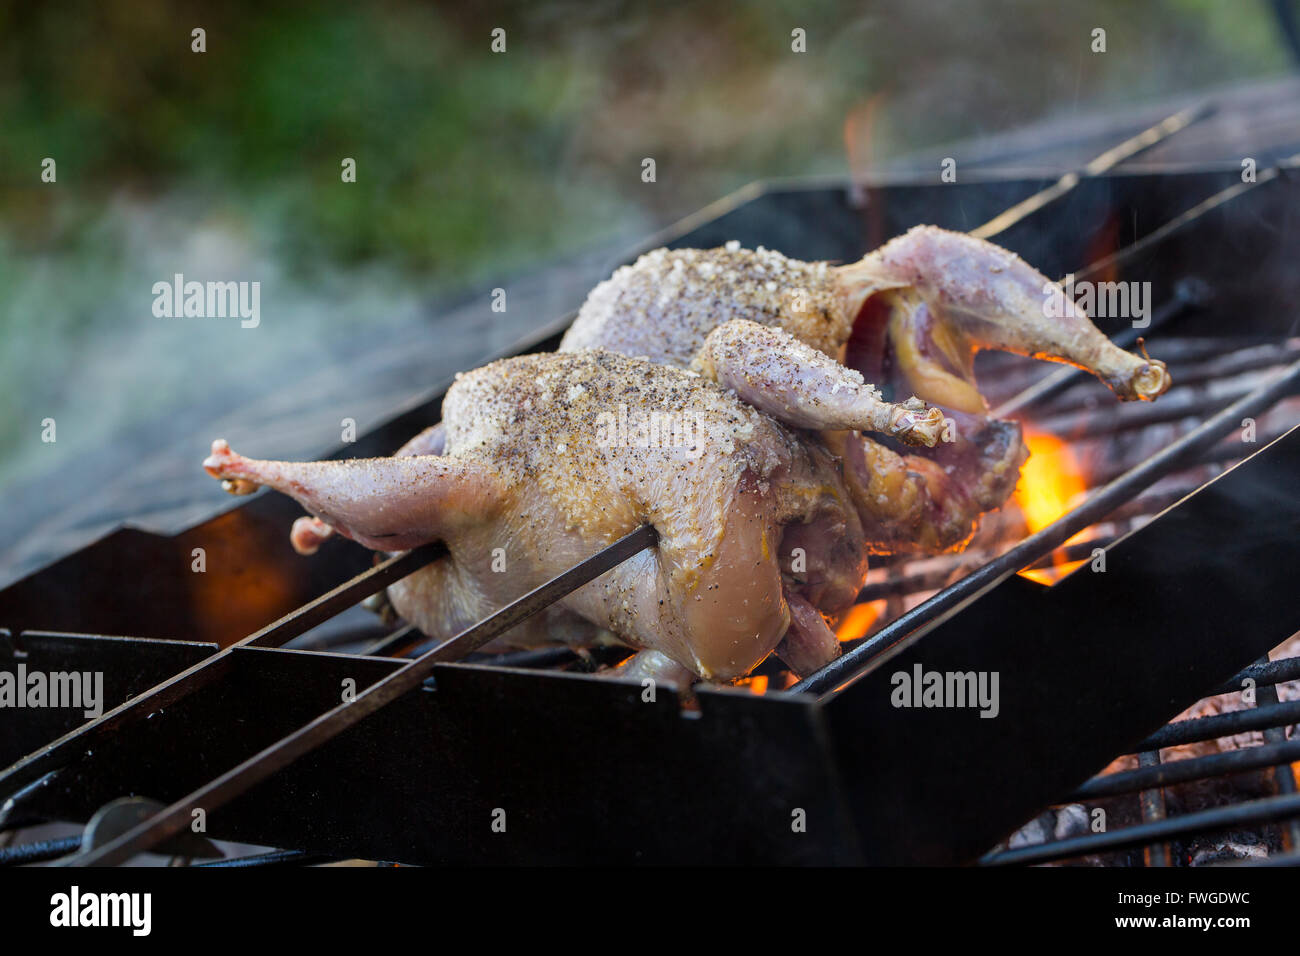 A spatchcocked game bird on skewers roasting on an open fire. Stock Photo